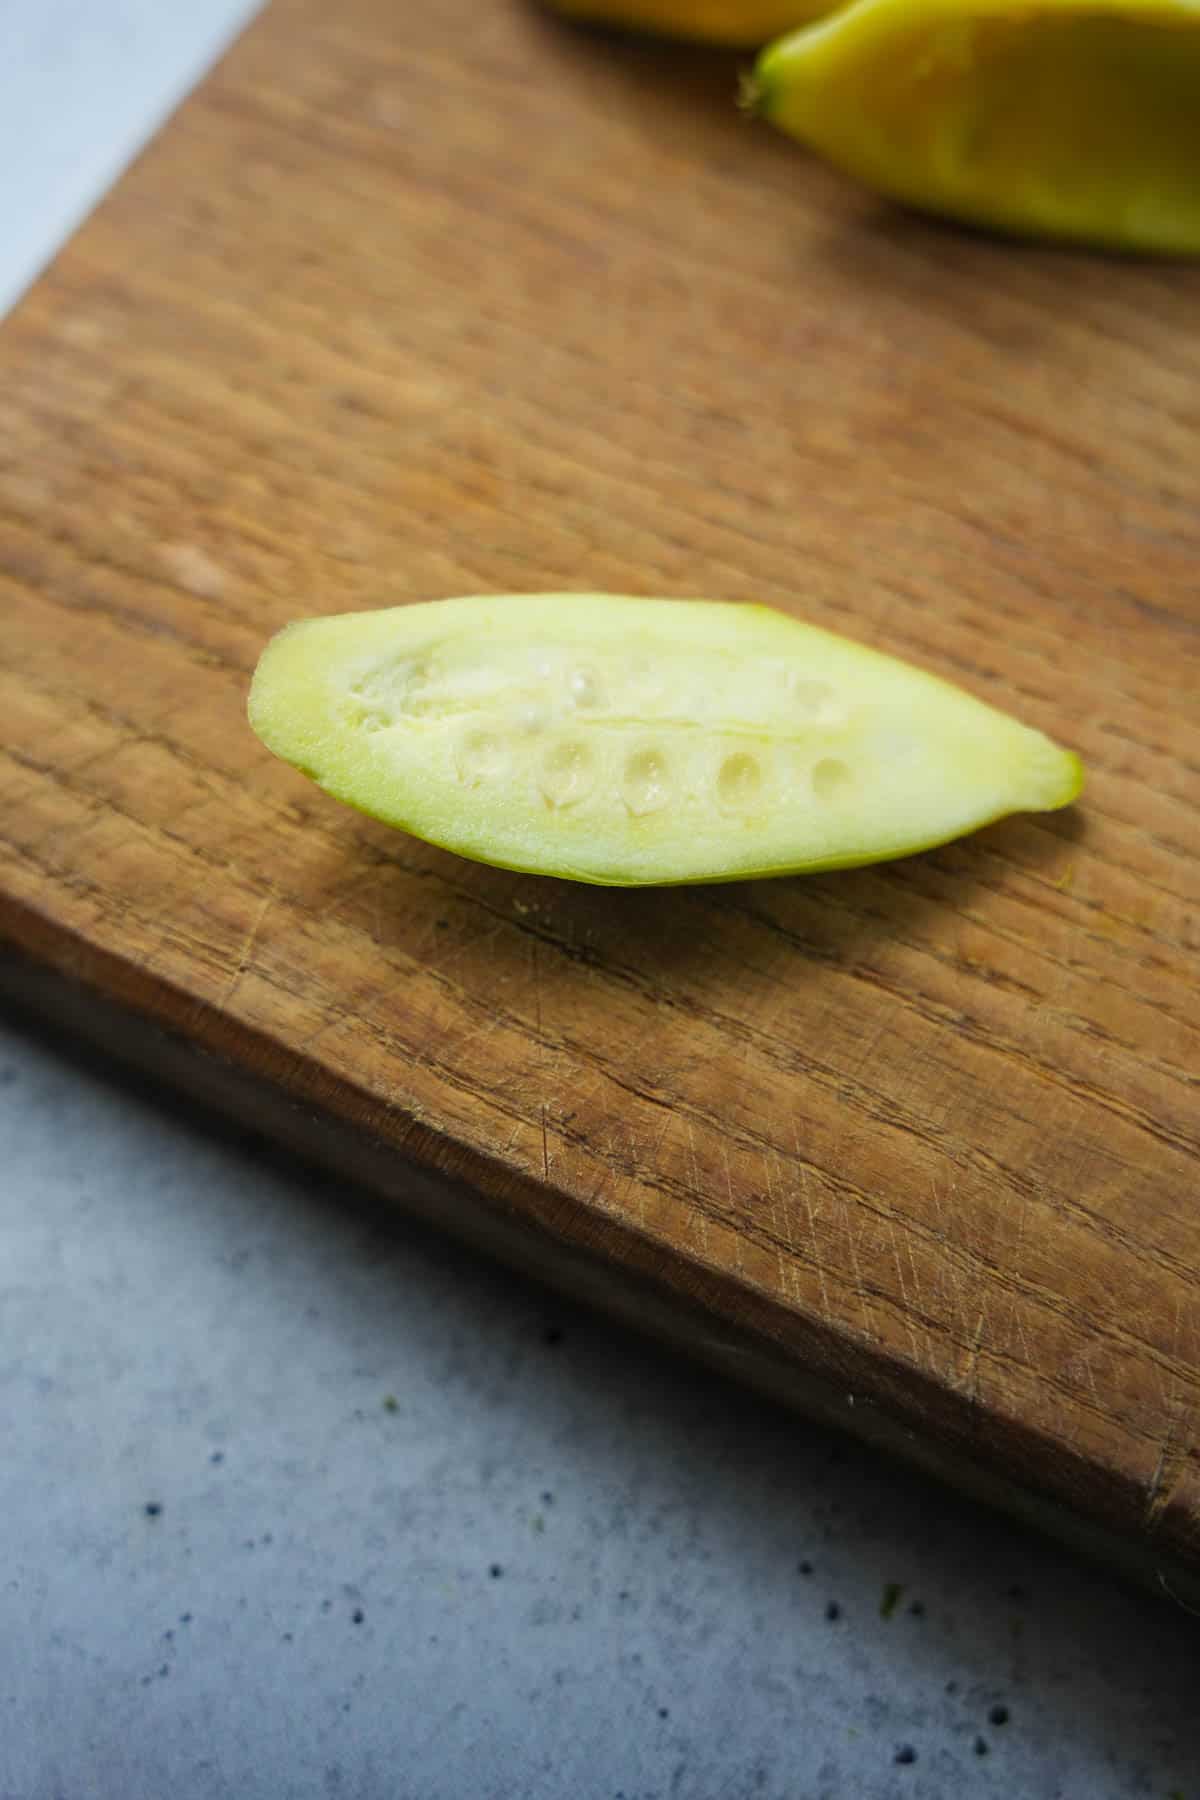 A young parwal with undeveloped seeds that don't need to be removed on a cutting board.